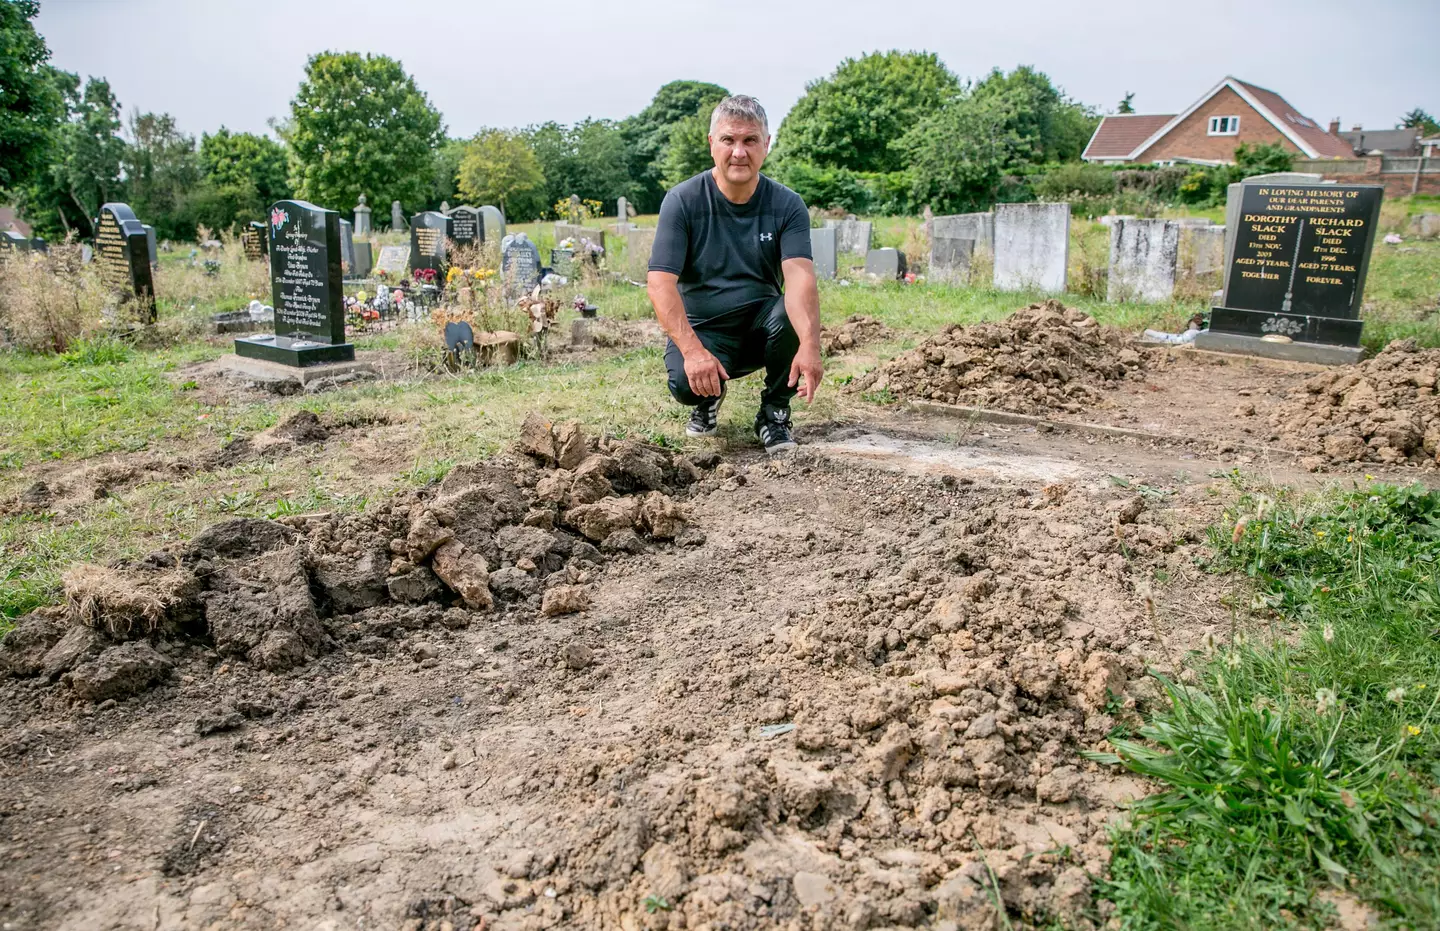 The family believe that Thomas could be buried in a nearby grave.